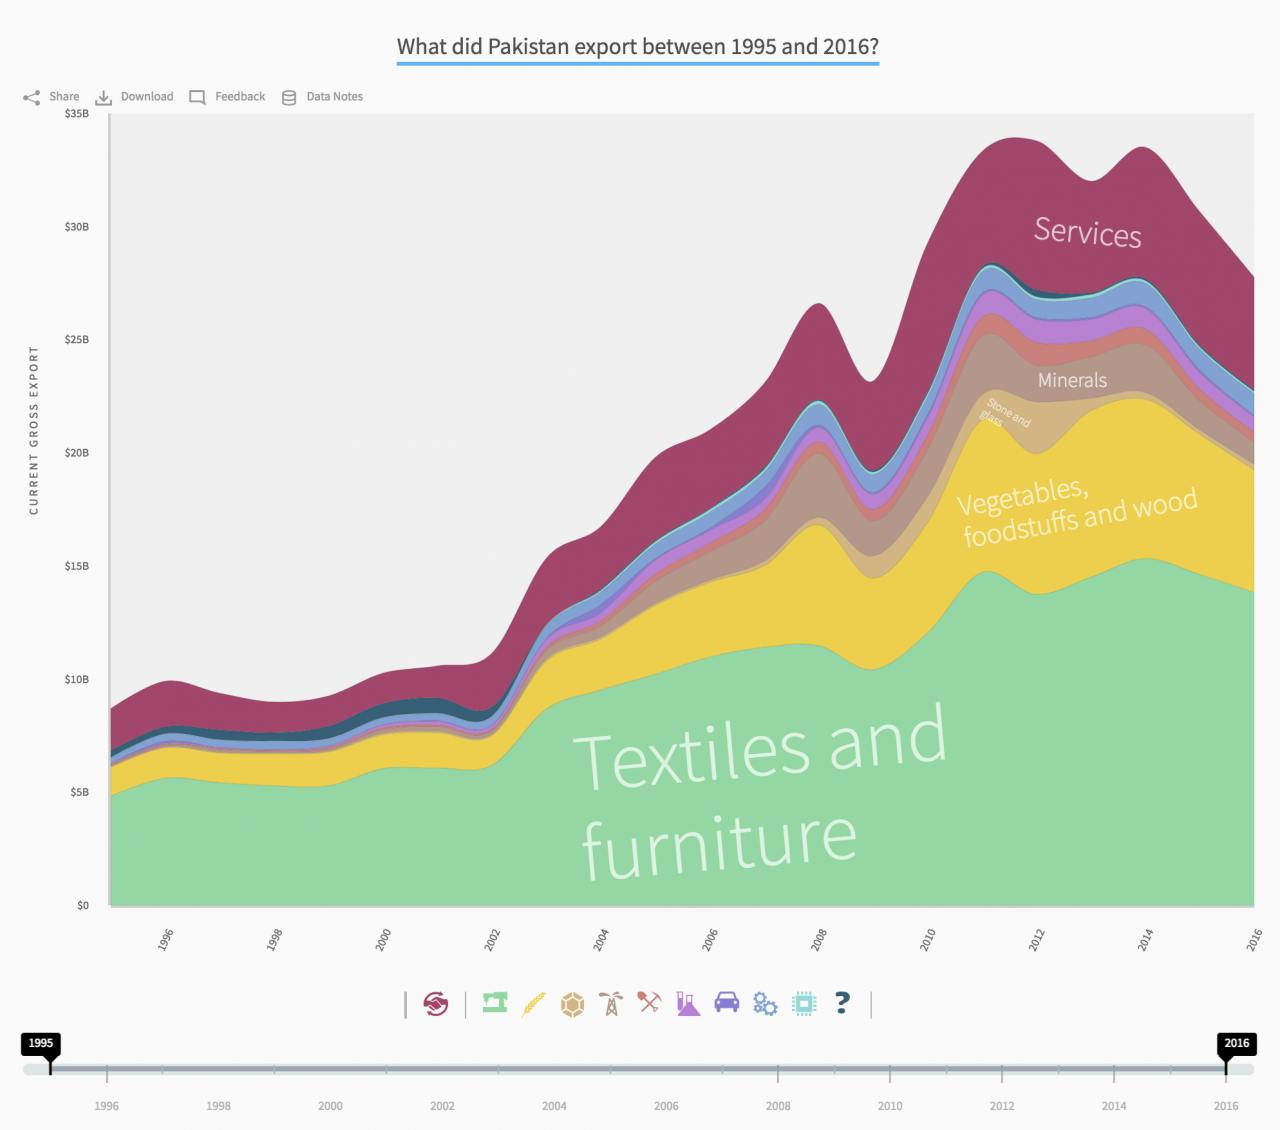 What did Pakistan export between 1995 and 2016? Top 3: Textiles and furniture, vegetables, foodstuff and wood, minerals. Source: Harvard CID Atlas.